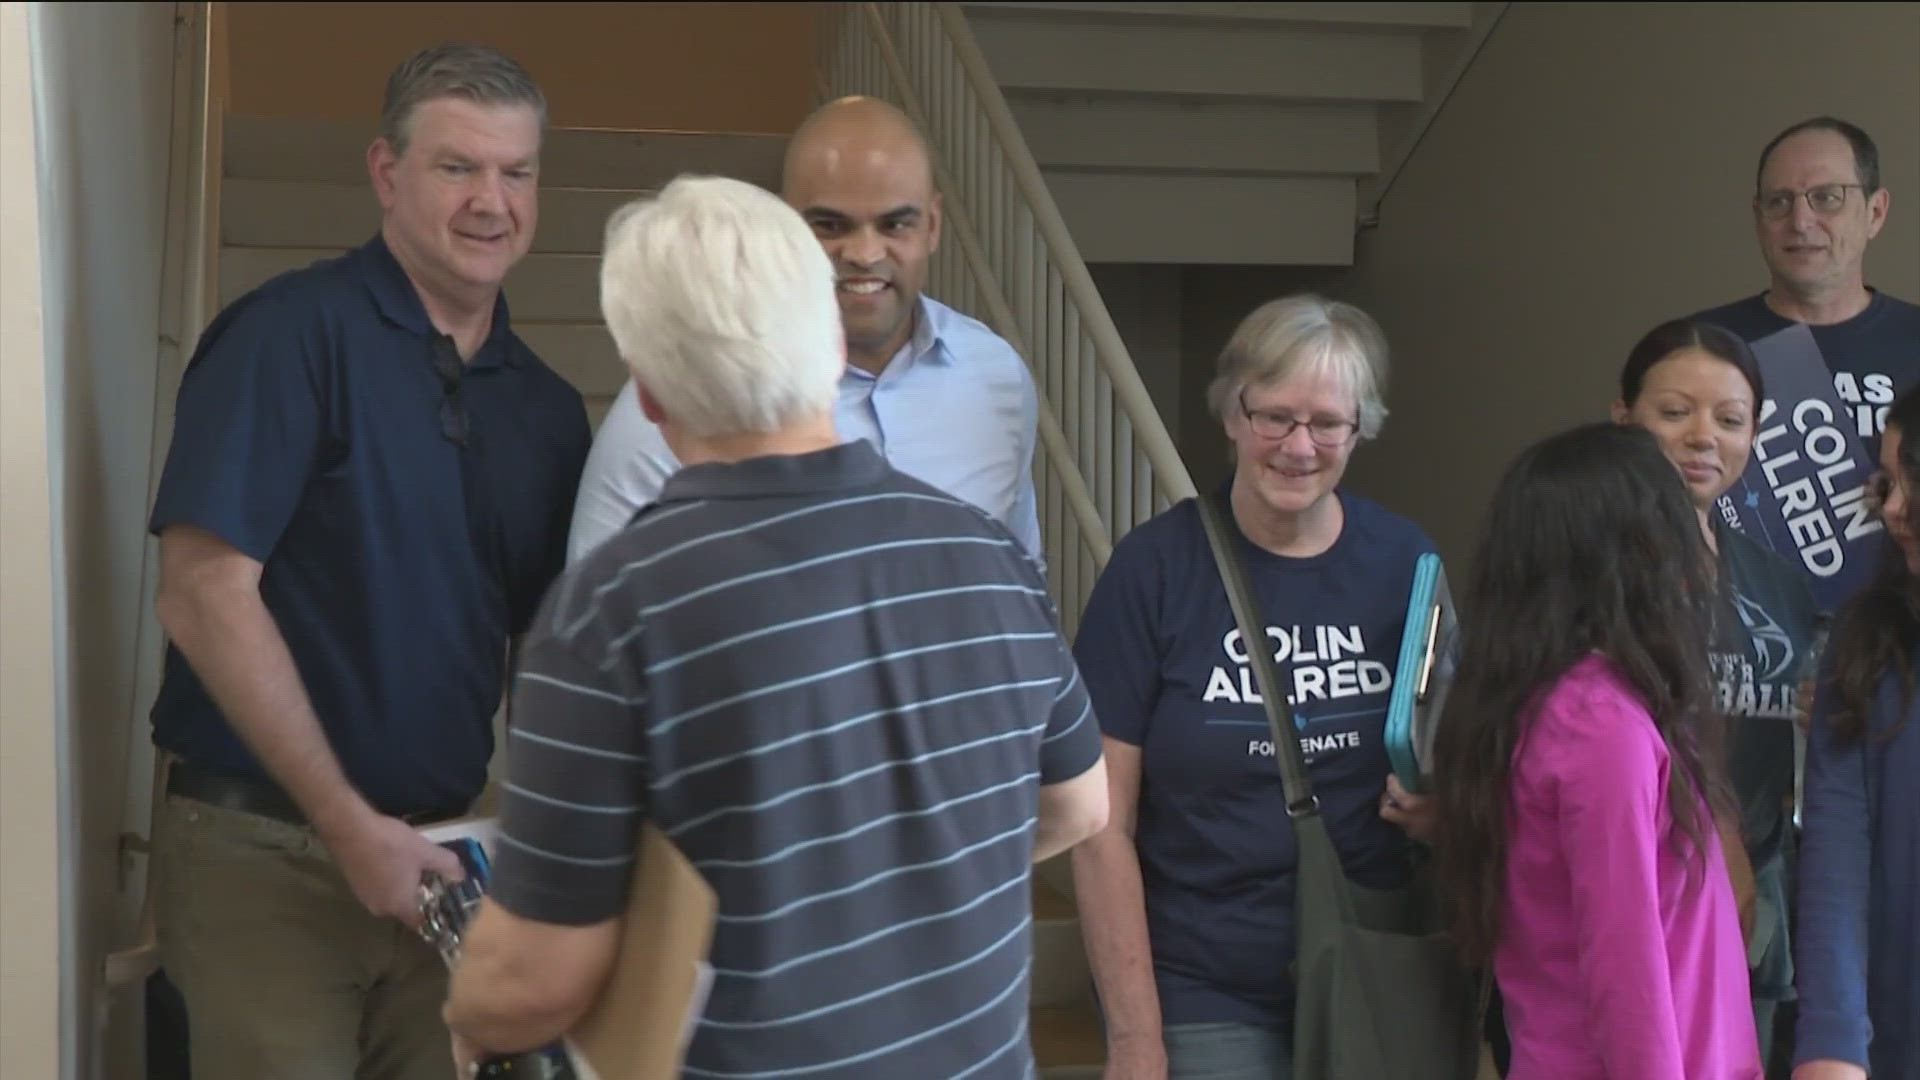 On Saturday, Rep. Colin Allred made his way from Dallas to Austin as part of his statewide weekend of action to get voters out to the polls.